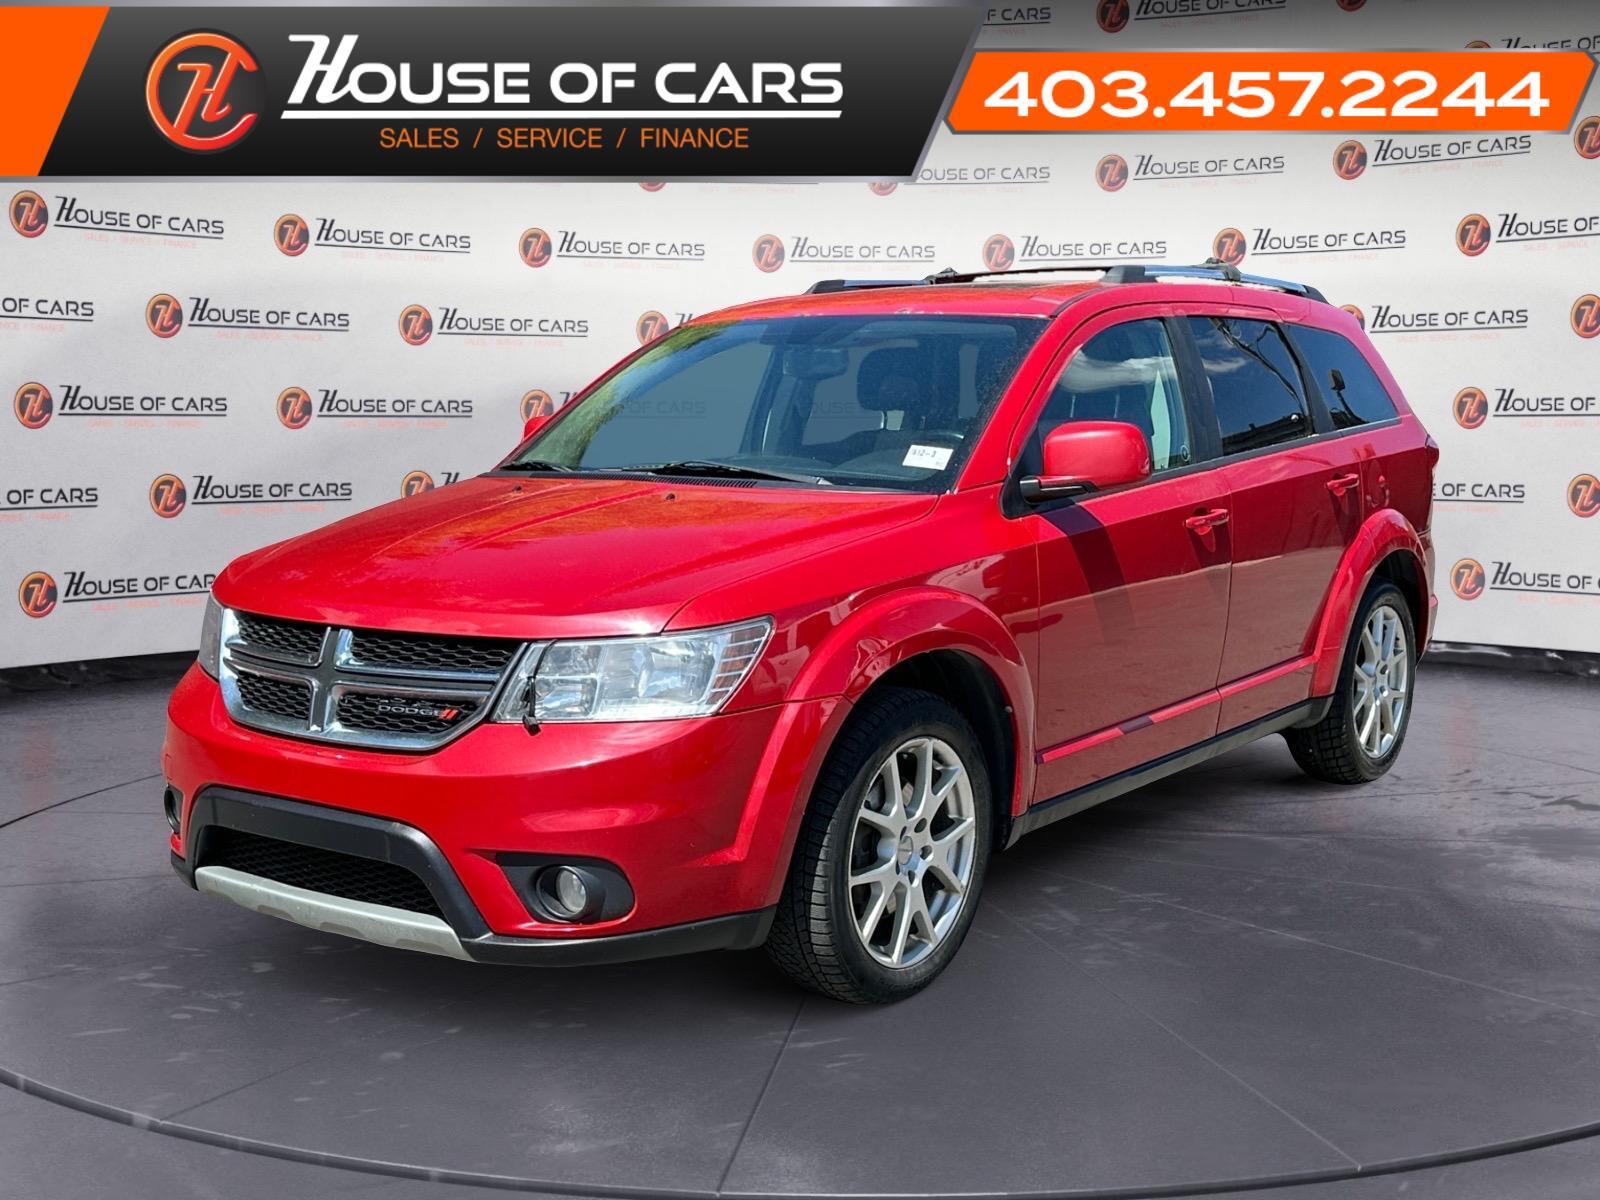 2014 Dodge Journey FWD 4dr Limited Mechanic Special